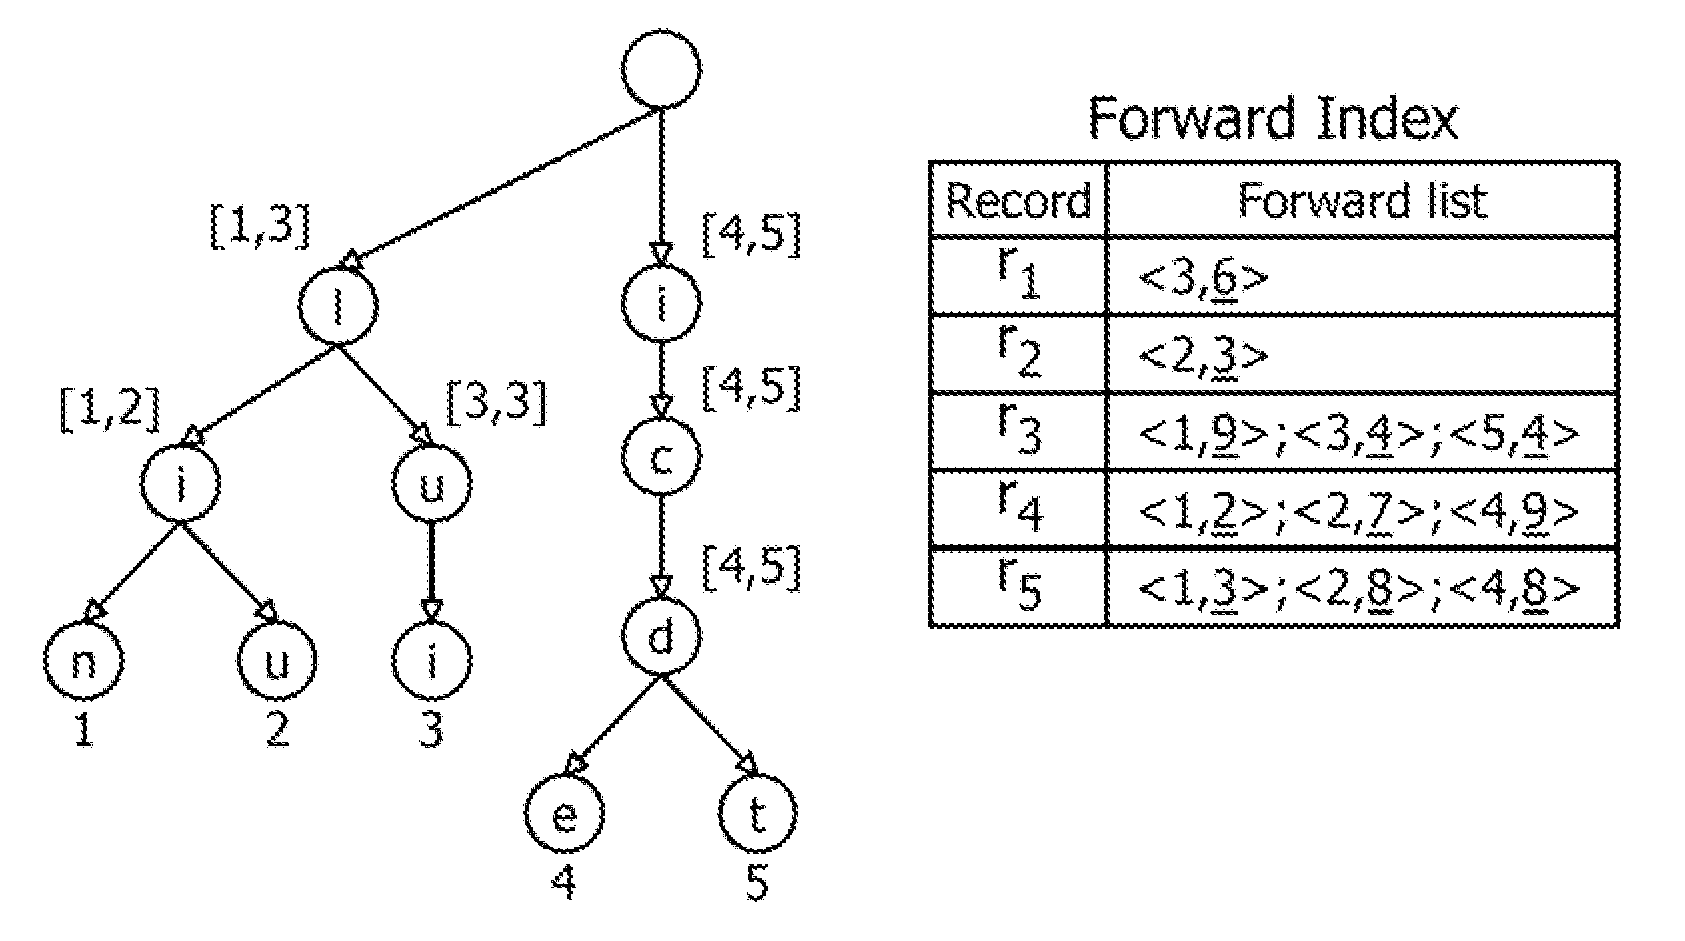 Method for Efficiently Supporting Interactive, Fuzzy Search on Structured Data